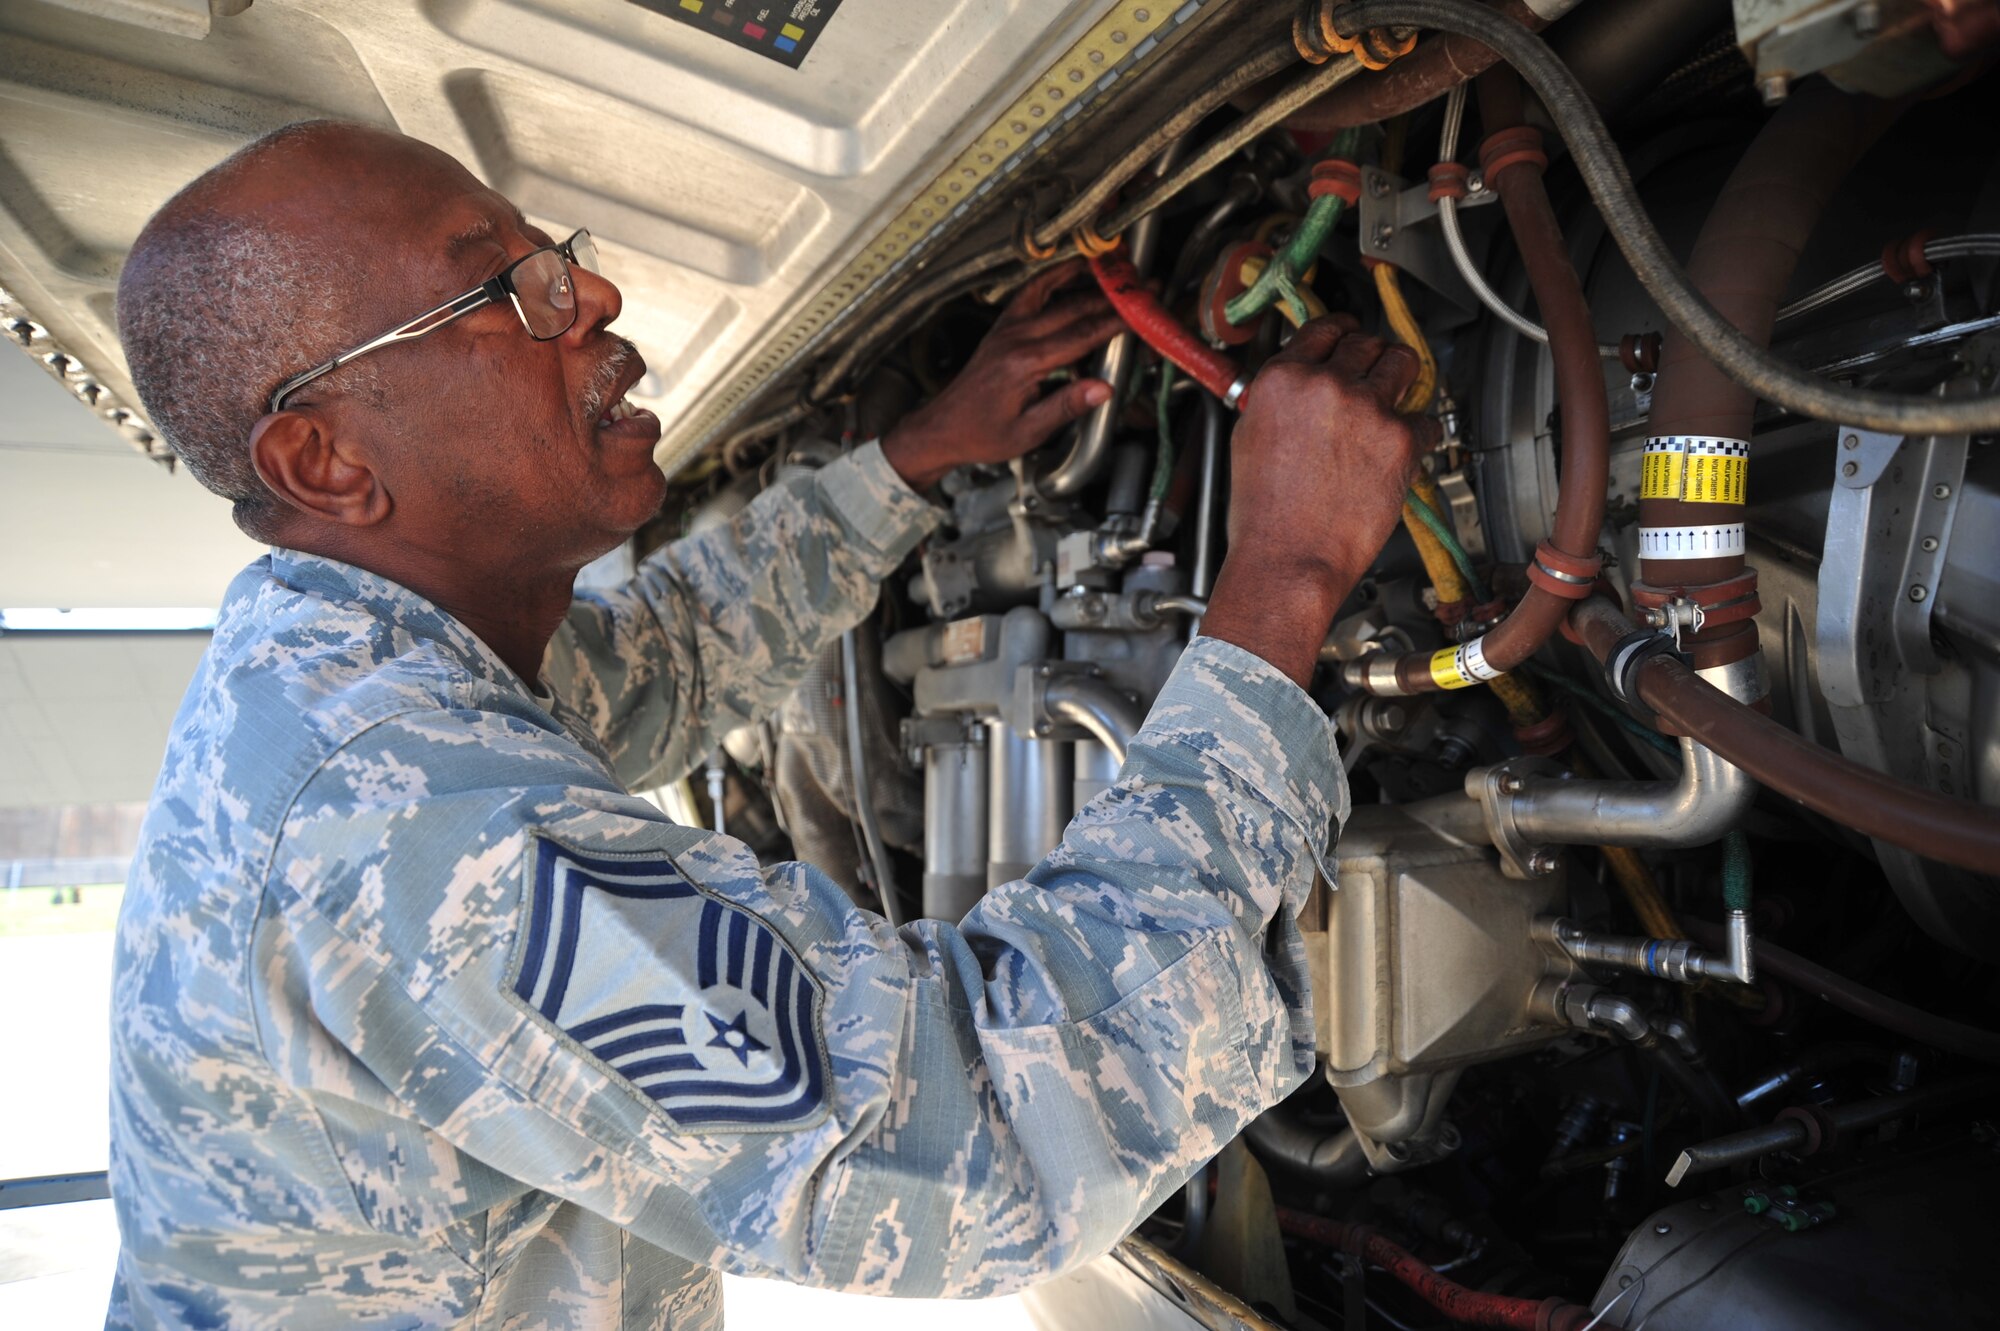 Senior Master Sgt. Charles Moore, 803rd Aircraft Maintenance Squadron production superintendent, examines a C-130J Super Hercules engine March 20, 2019. His retires from a 33 year military career in the 403rd Wing, April 1, 2019. (U.S. Air Force photo by TSgt. Michael Farrar)